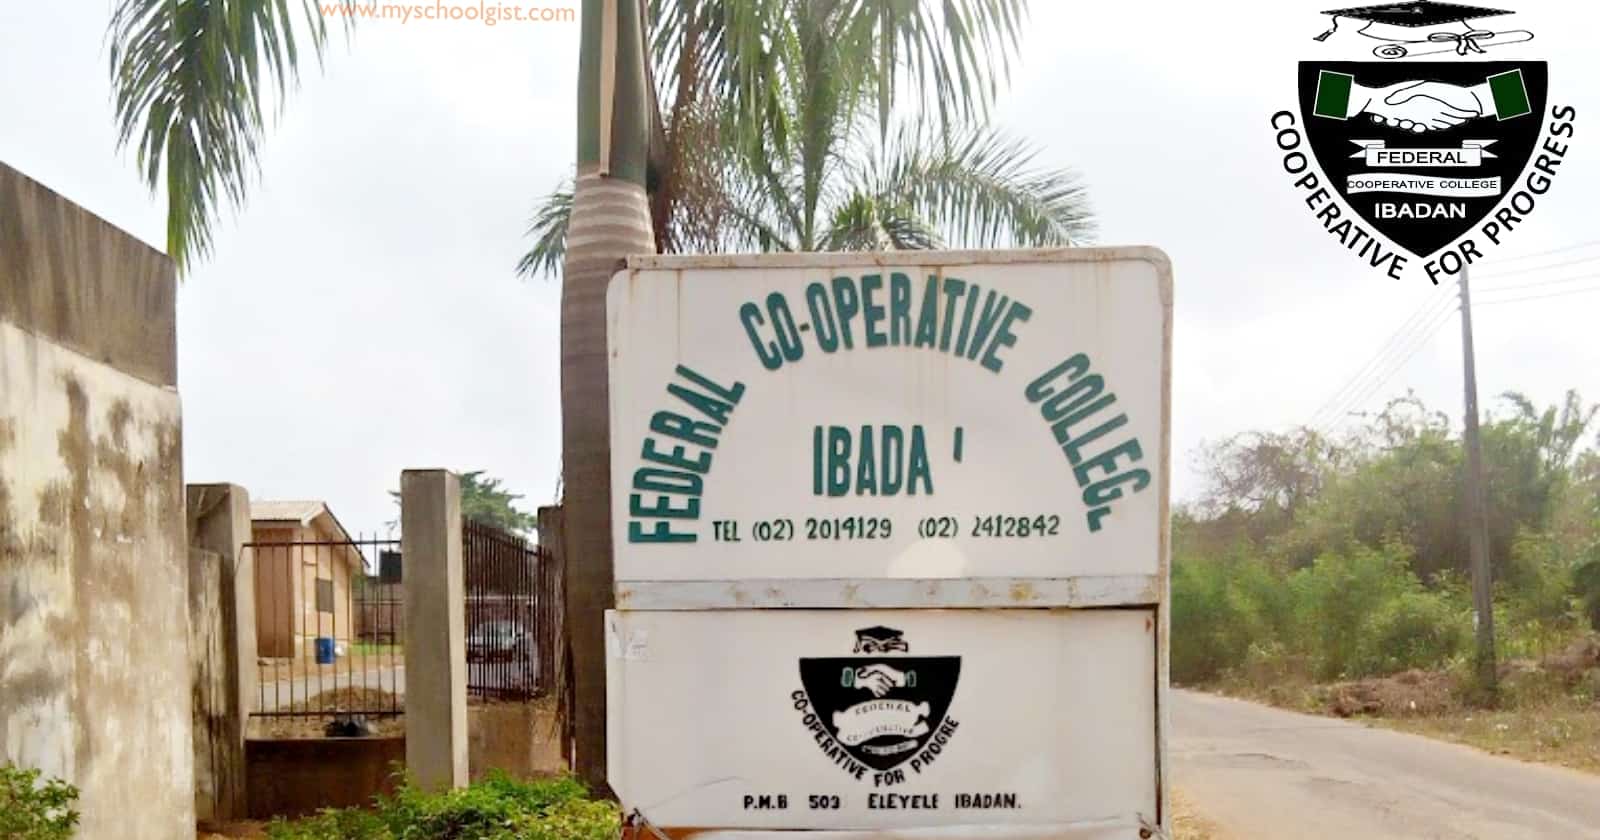 Federal Cooperative College (FCC) Ibadan Admission Acceptance Fee